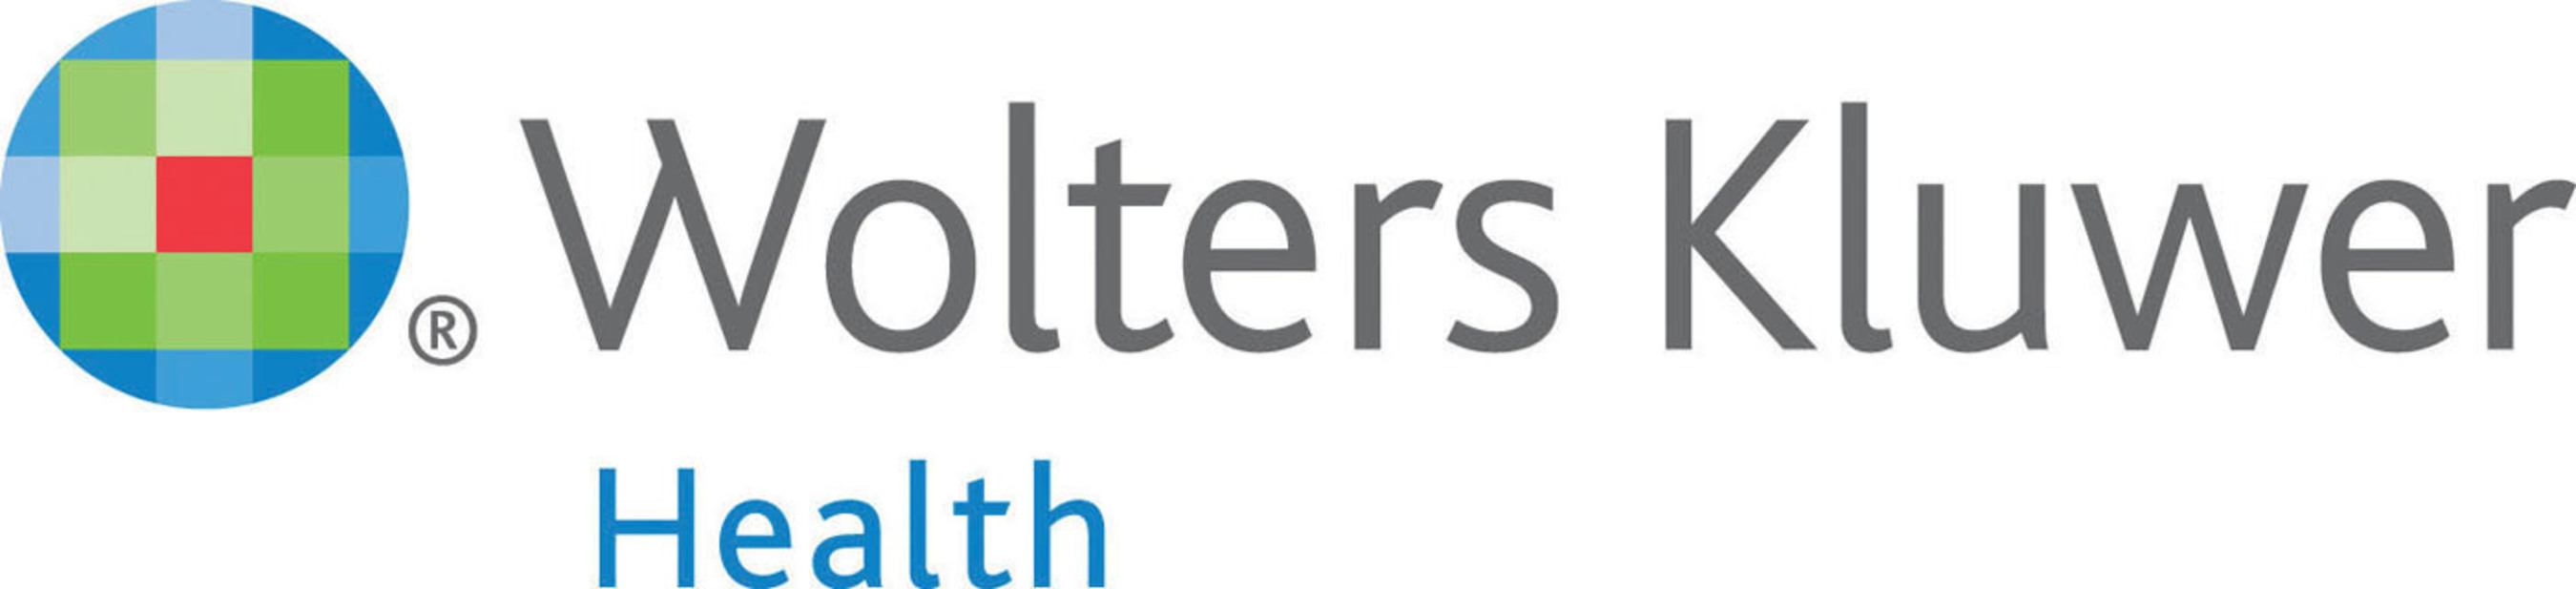 Wolters Kluwer Health.